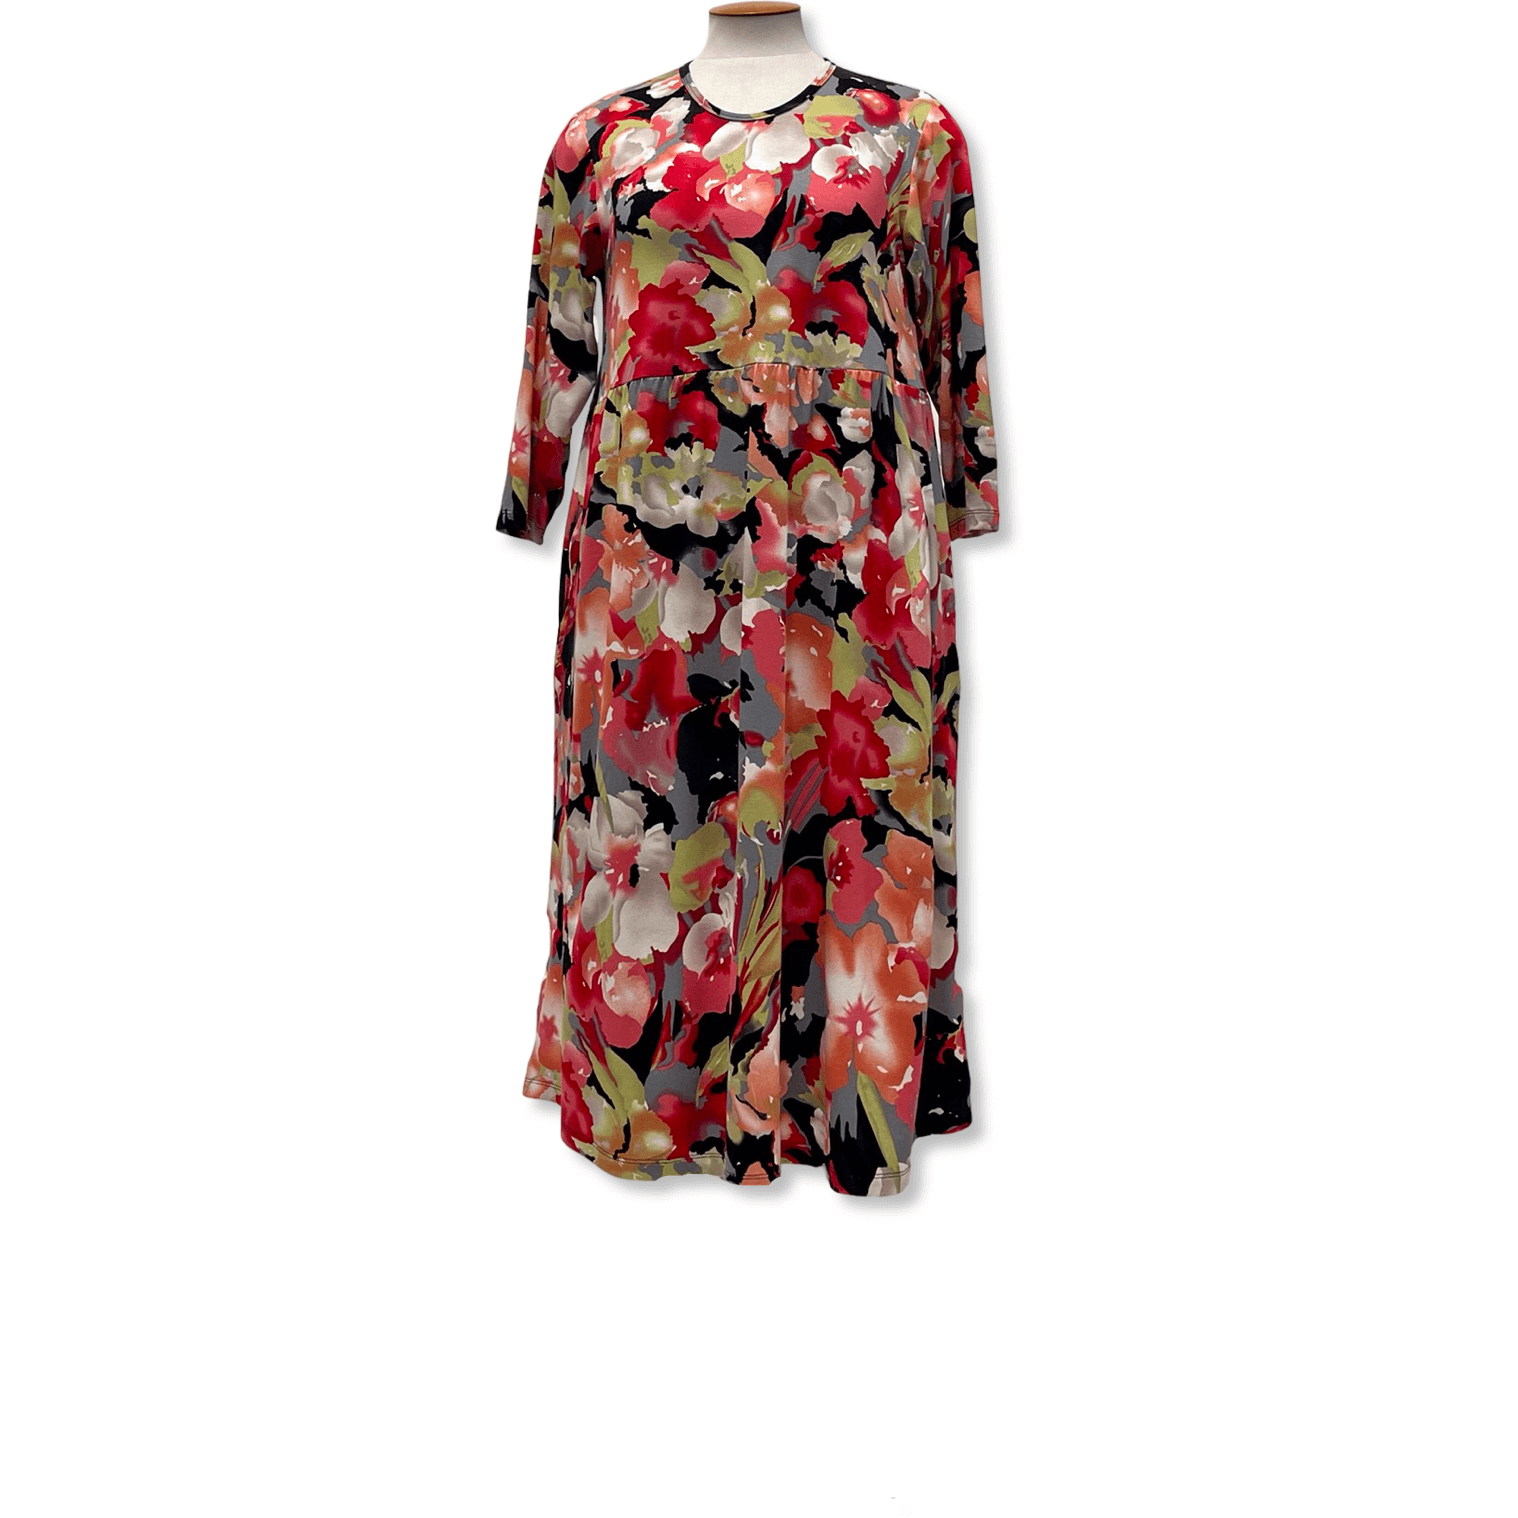 Bloom Clothing NZ,ALL DAY CUDDLES DRESS -Multi Floral,$90.00,